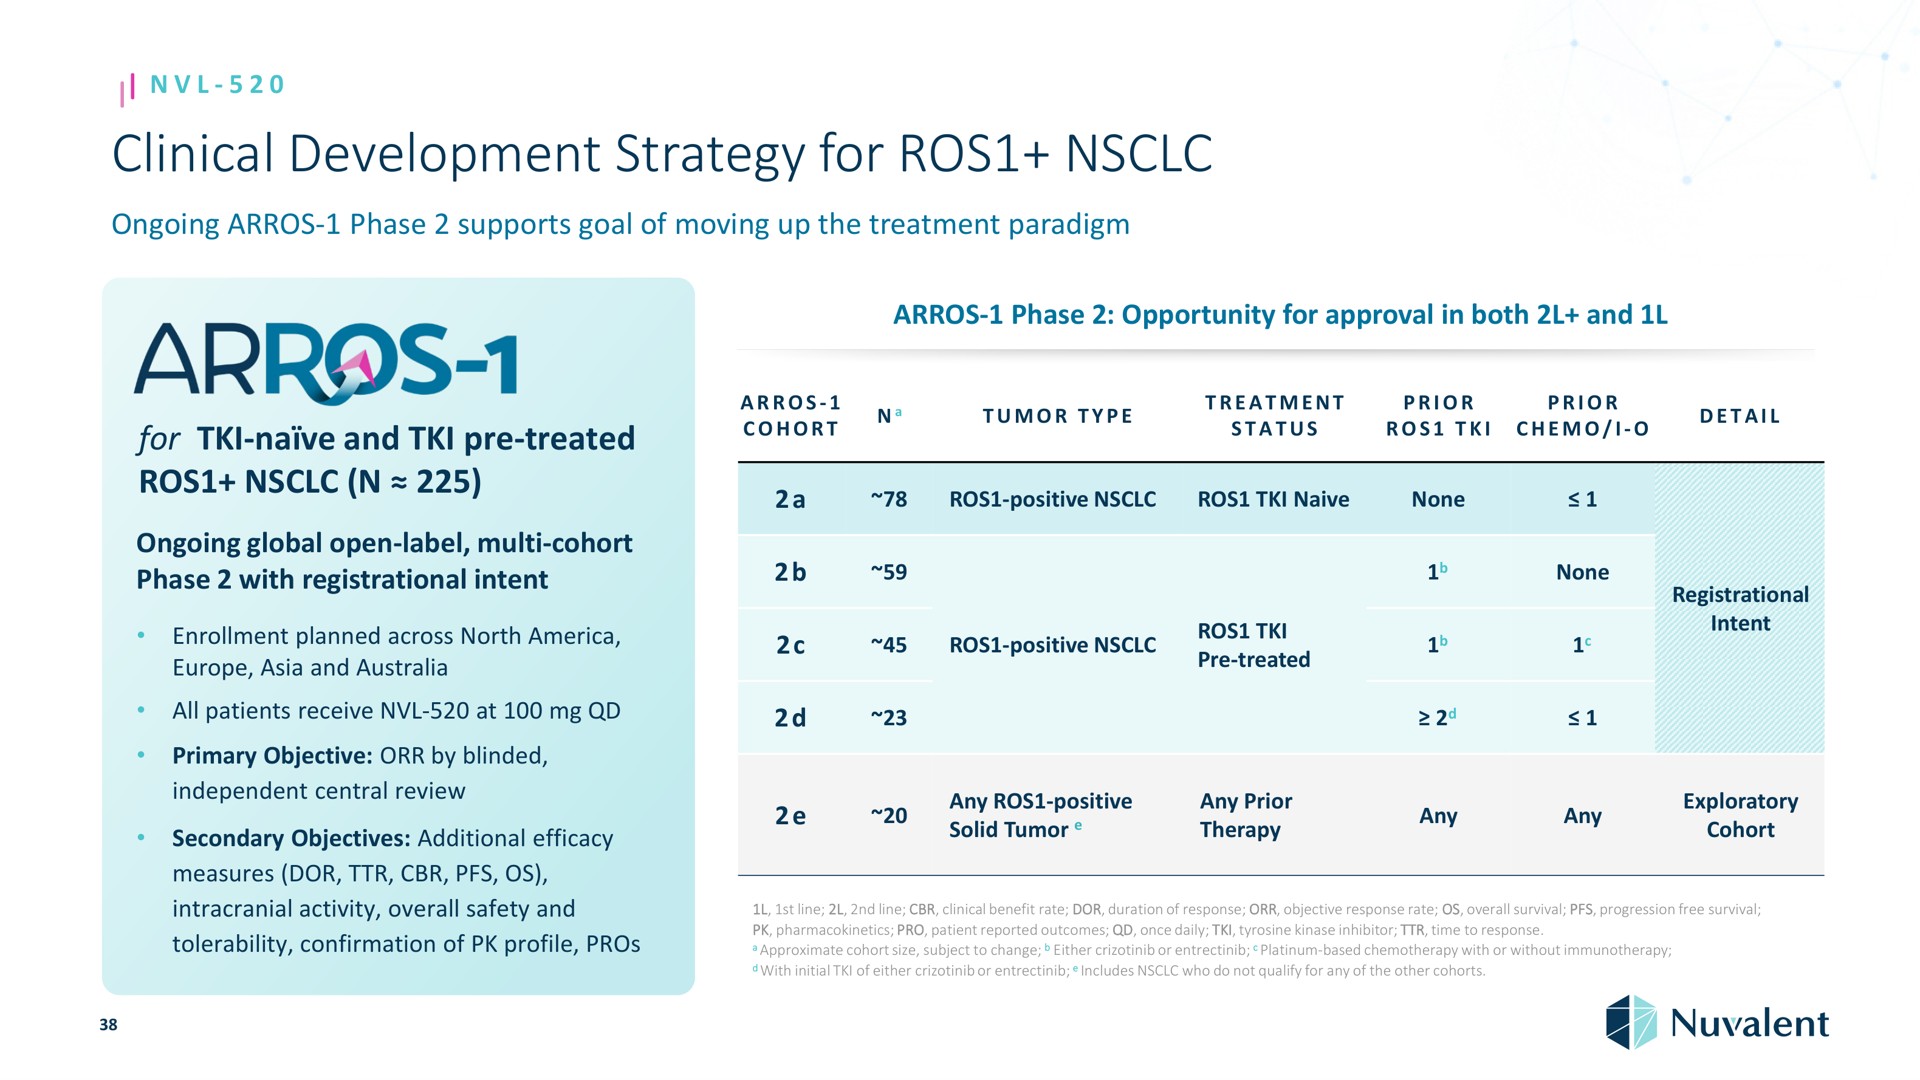 clinical development strategy for ongoing phase supports goal of moving up the treatment paradigm naive and treated ongoing global open label cohort phase with registrational intent enrollment planned across north and all patients receive at primary objective by blinded independent central review secondary objectives additional efficacy measures dor intracranial activity overall safety and tolerability confirmation of profile pros phase opportunity approval in both and cohort tumor type treatment status prior prior i positive naive none a positive treated any positive solid tumor any prior therapy none any registrational intent explorator cohort without | Nuvalent